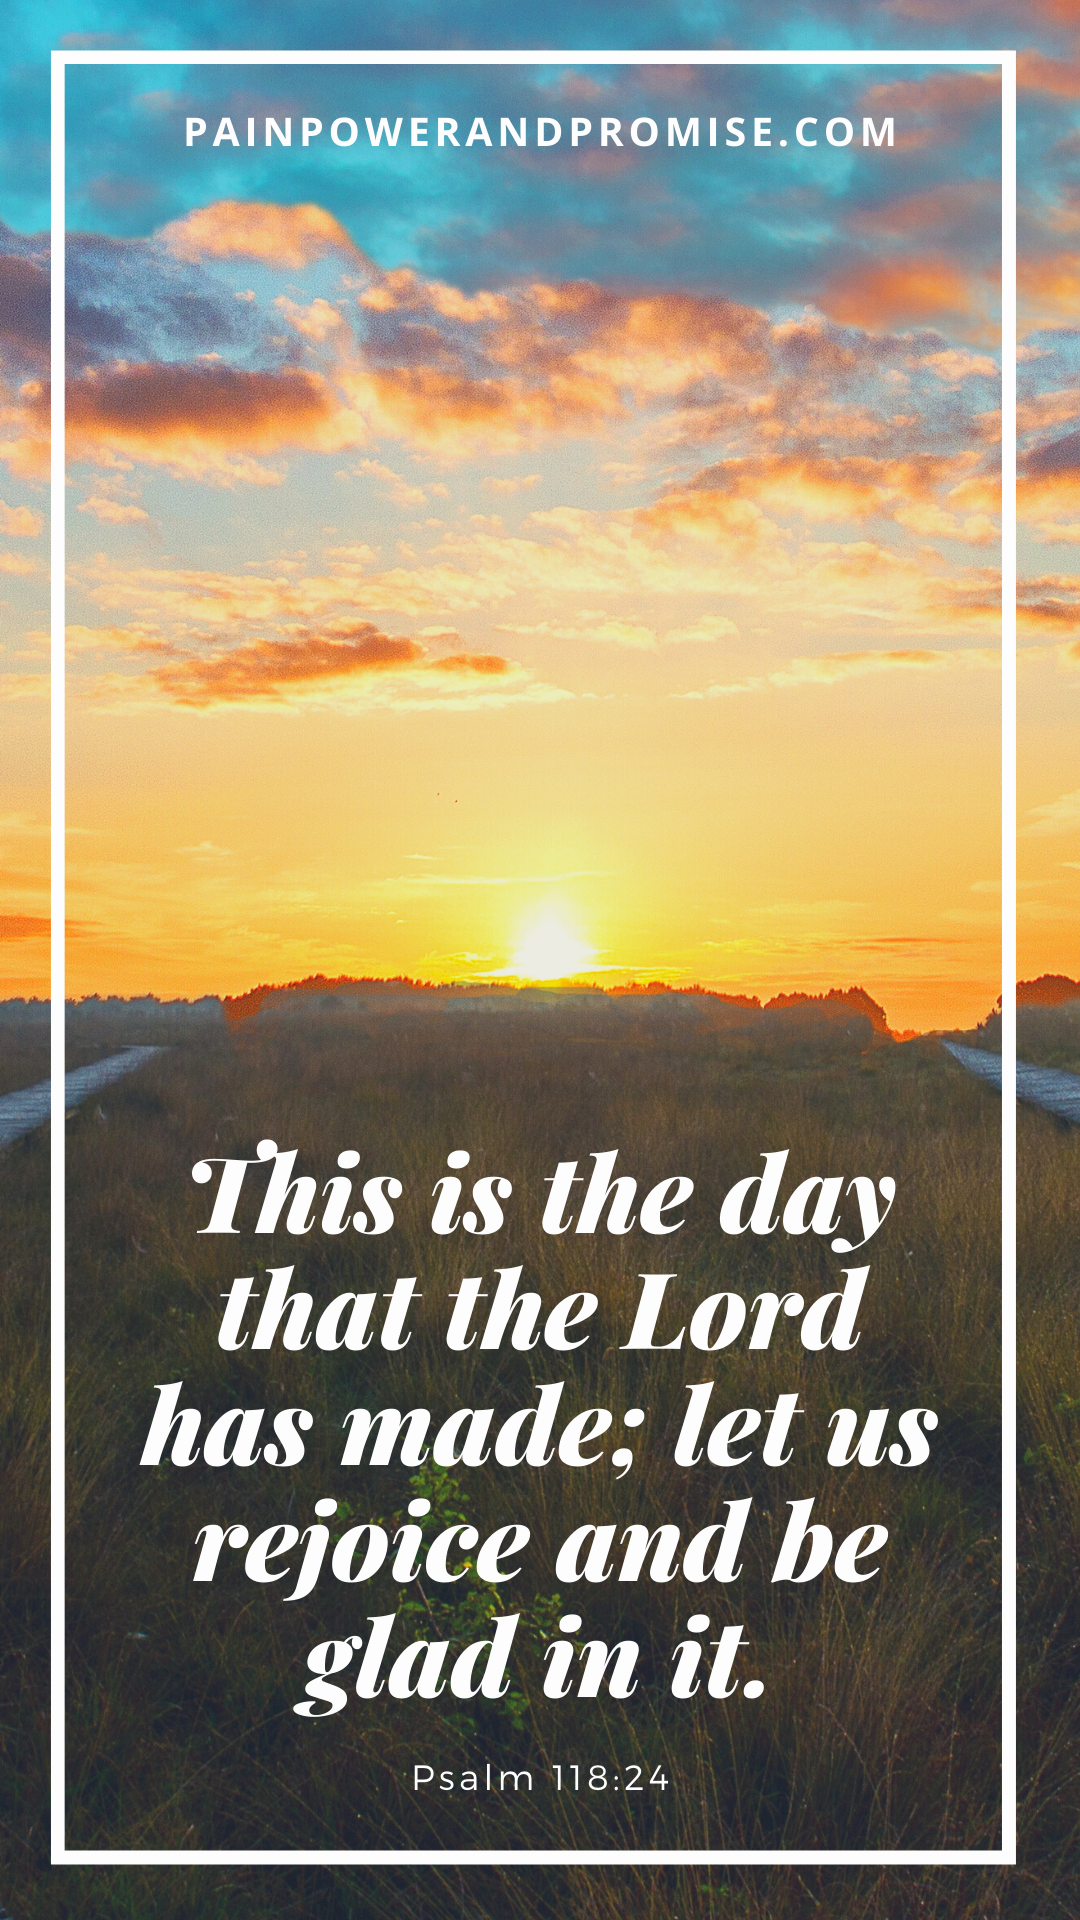 Inspirational Quote: This is the day that the Lord has made; let us rejoice and be glad in it.